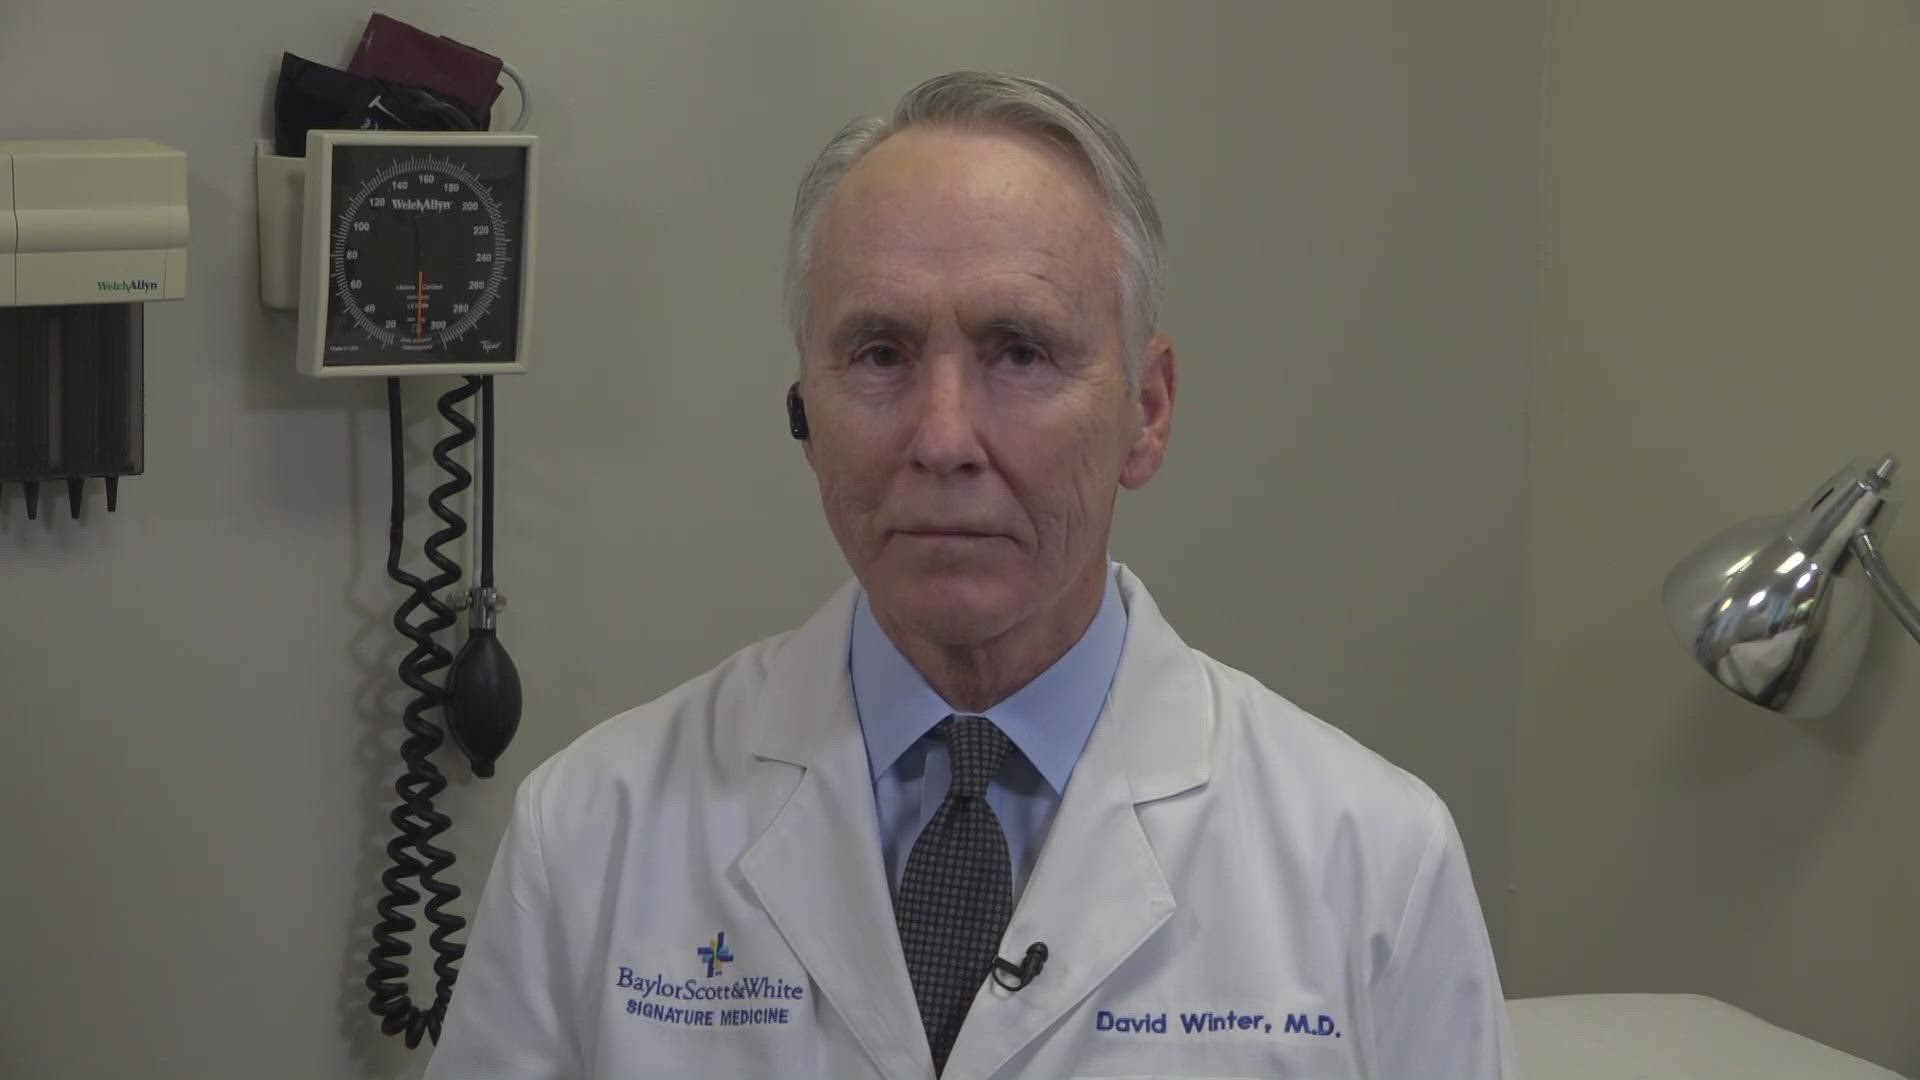 Dr. David Winter tells us what we should know about the latest COVID-19 booster.